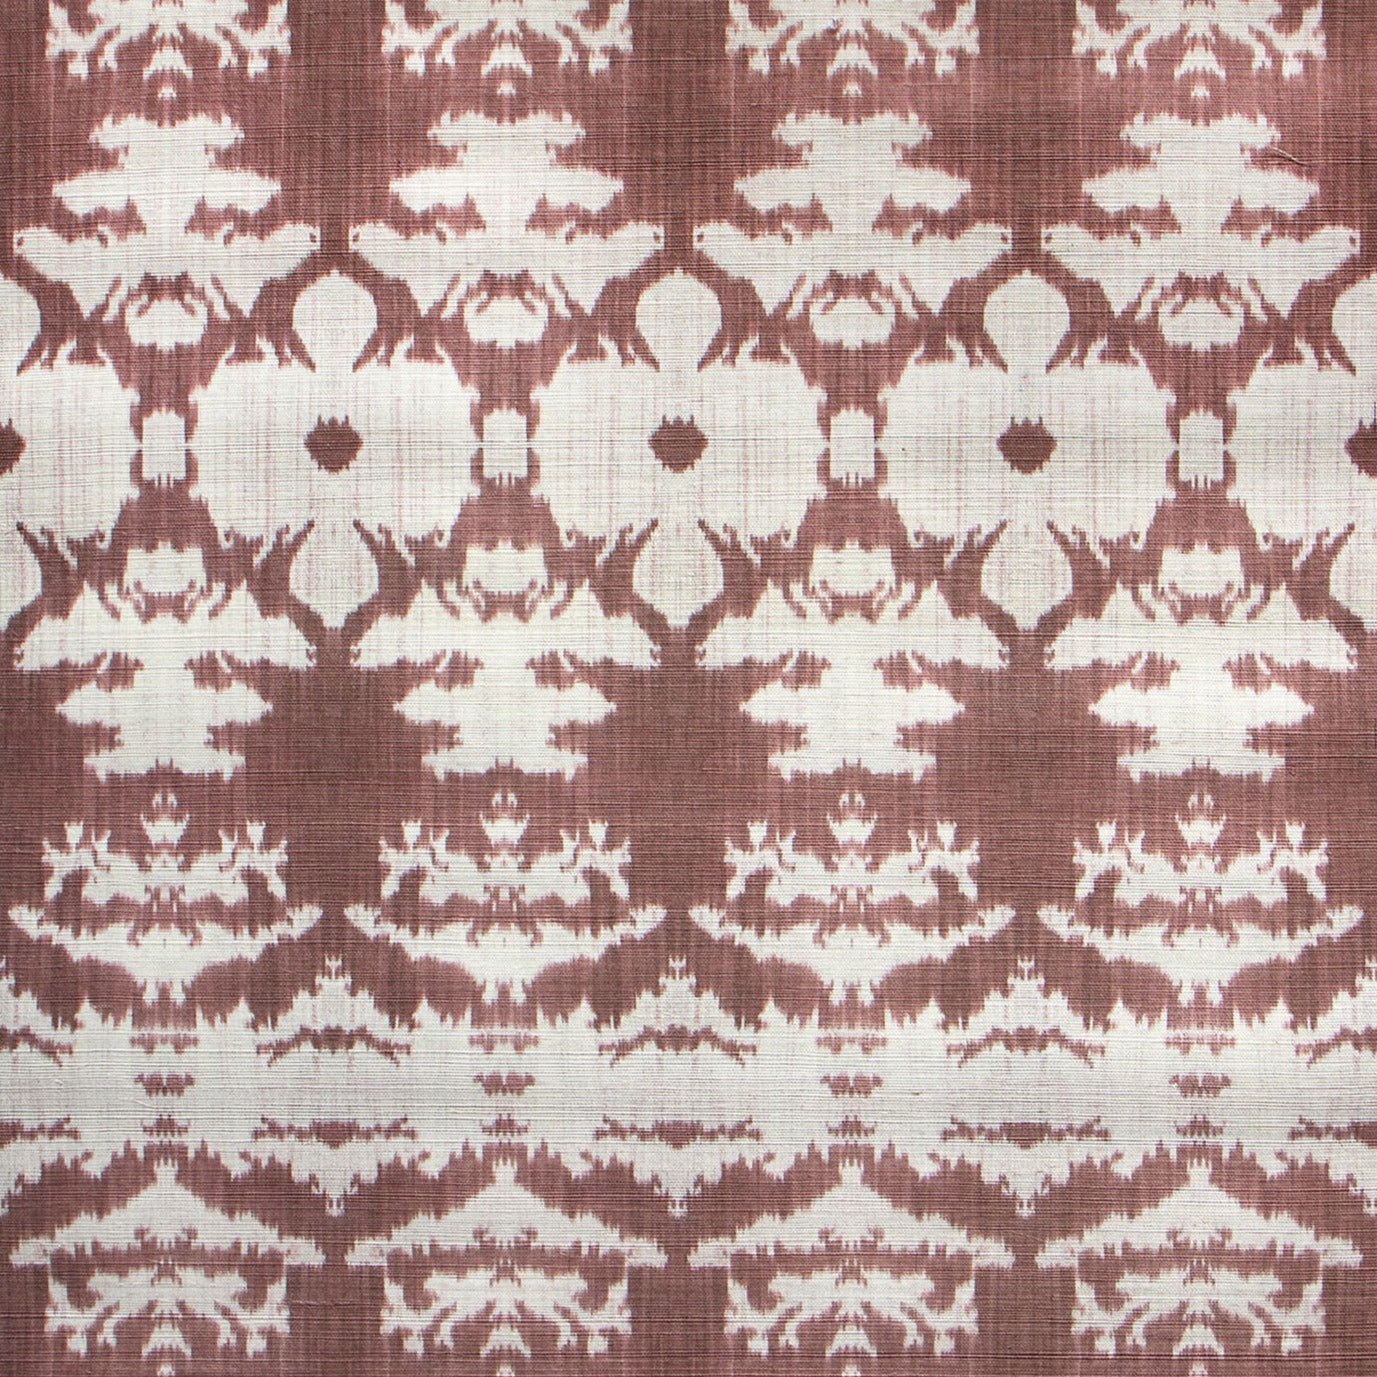 Detail of wallpaper in an ikat pattern in rust and tan.